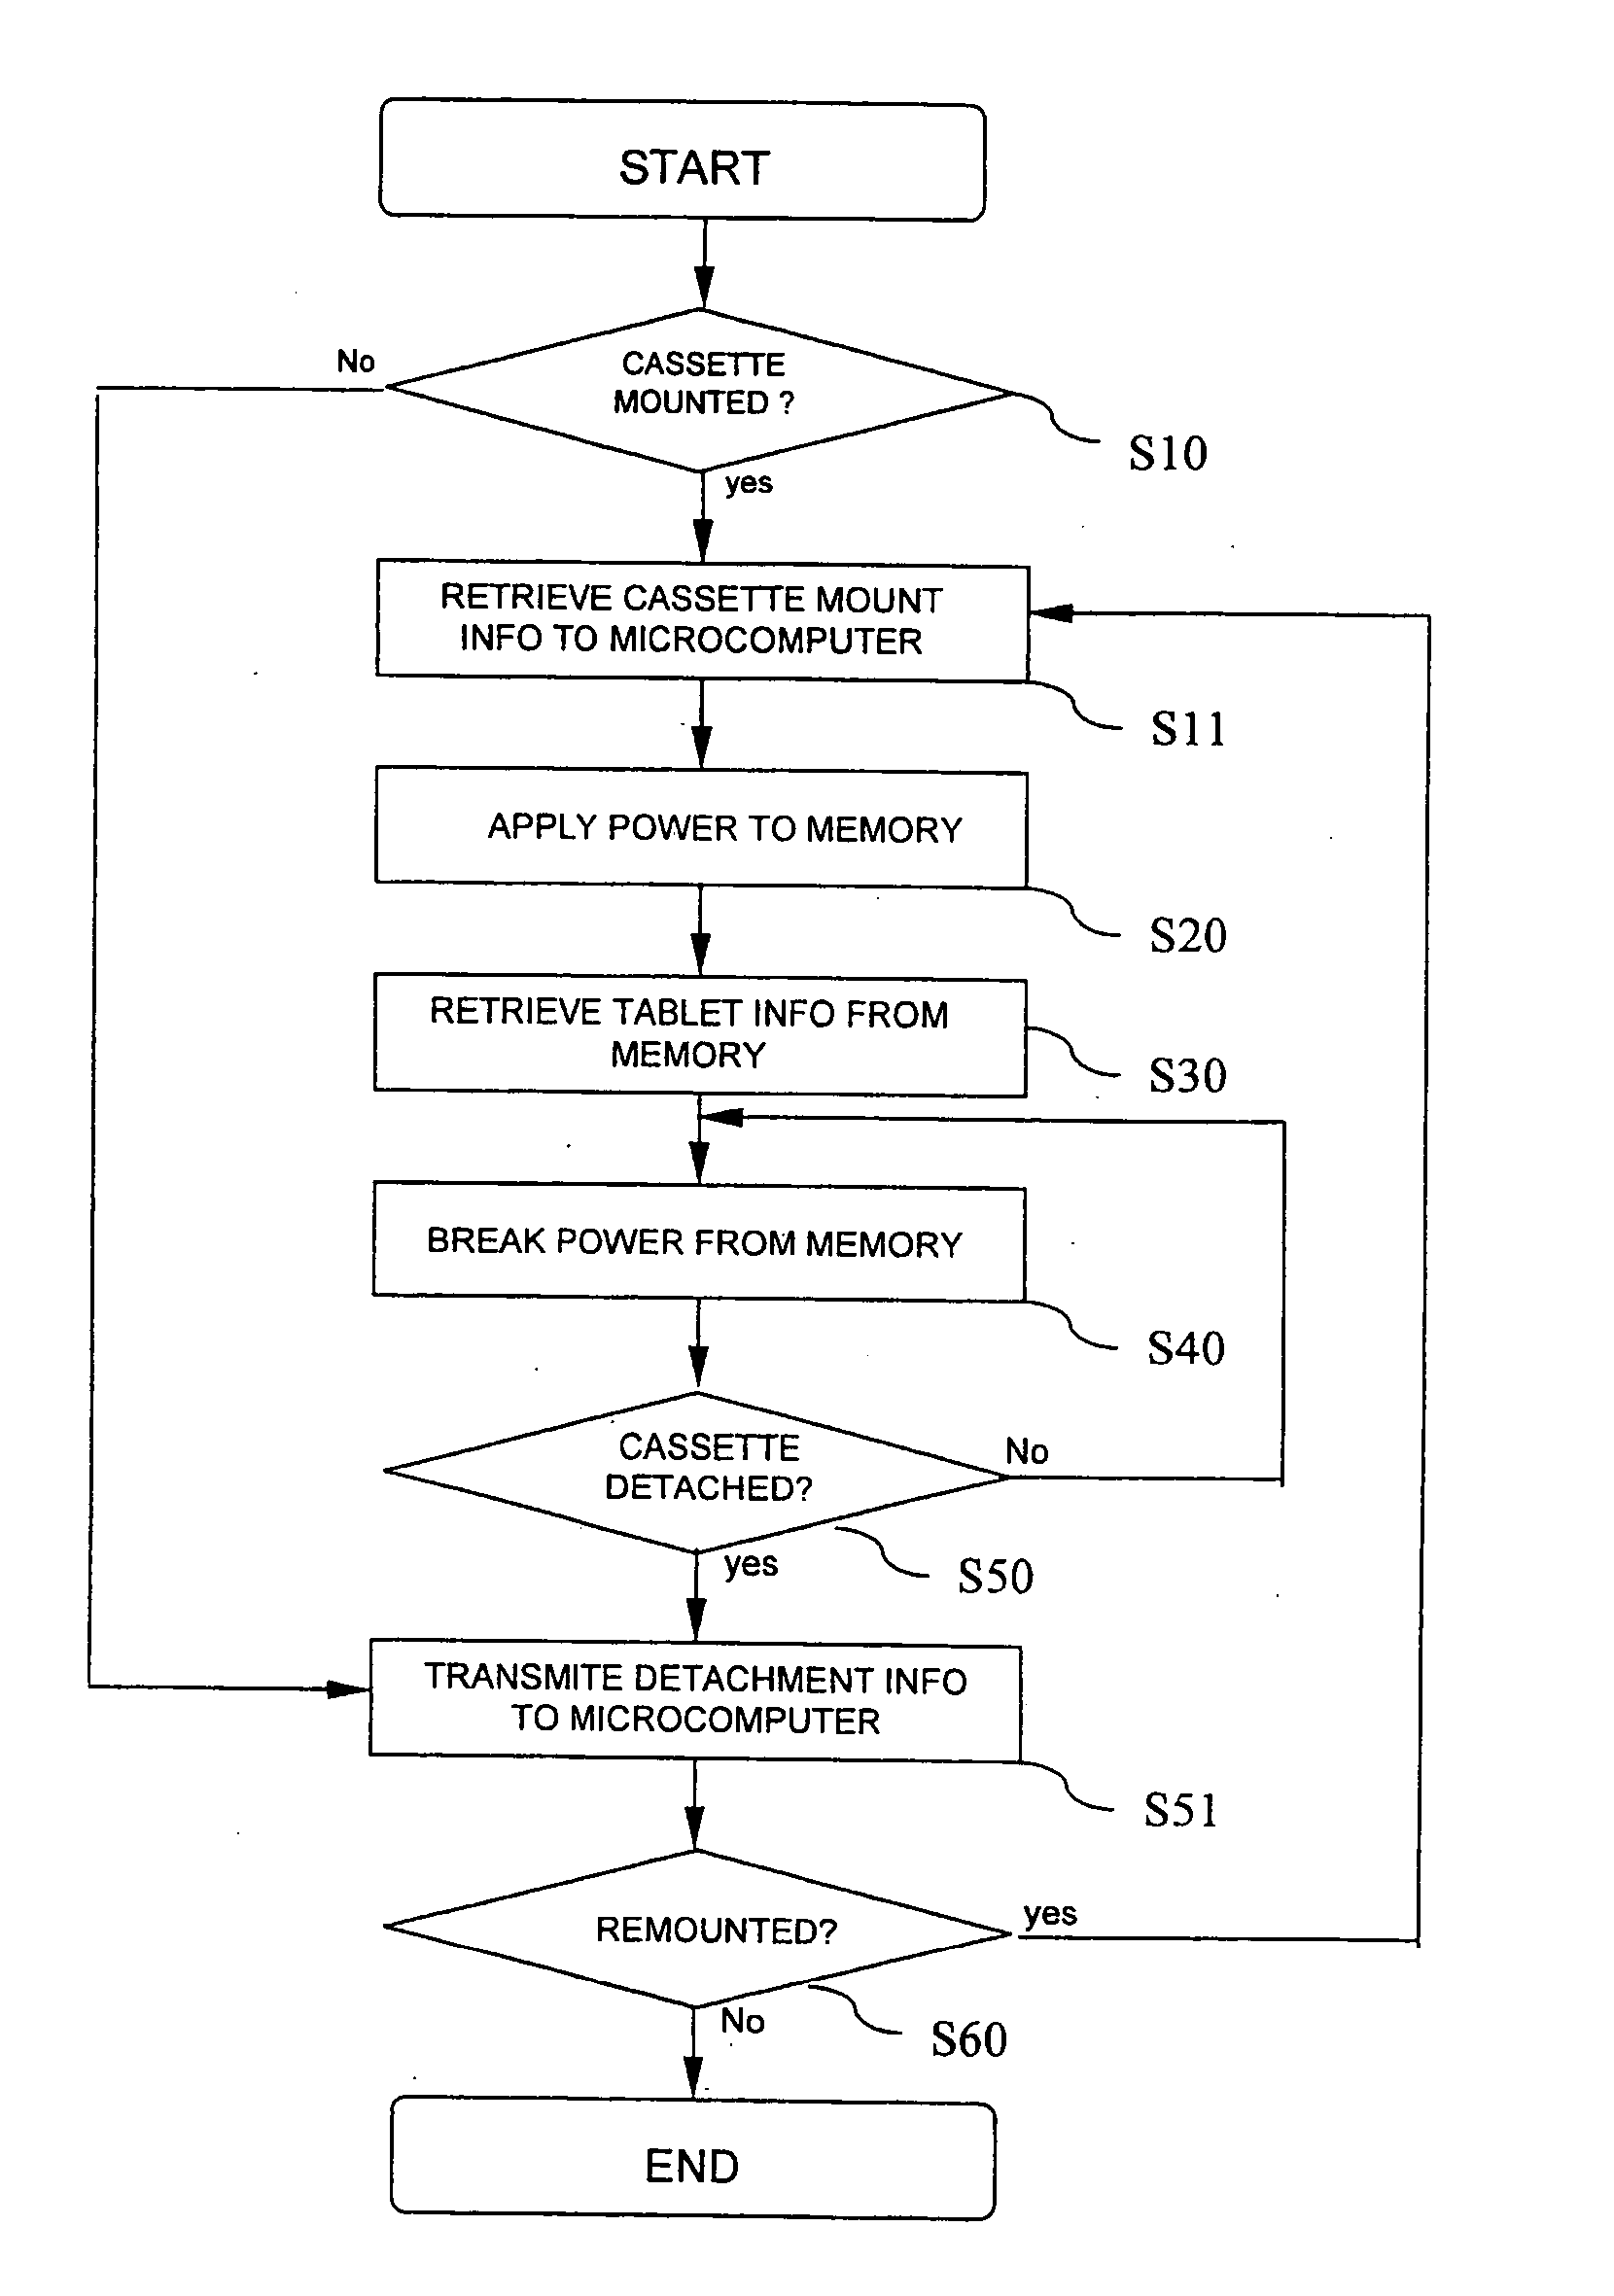 Tablet cassette control method of medication dispensing and packaging system